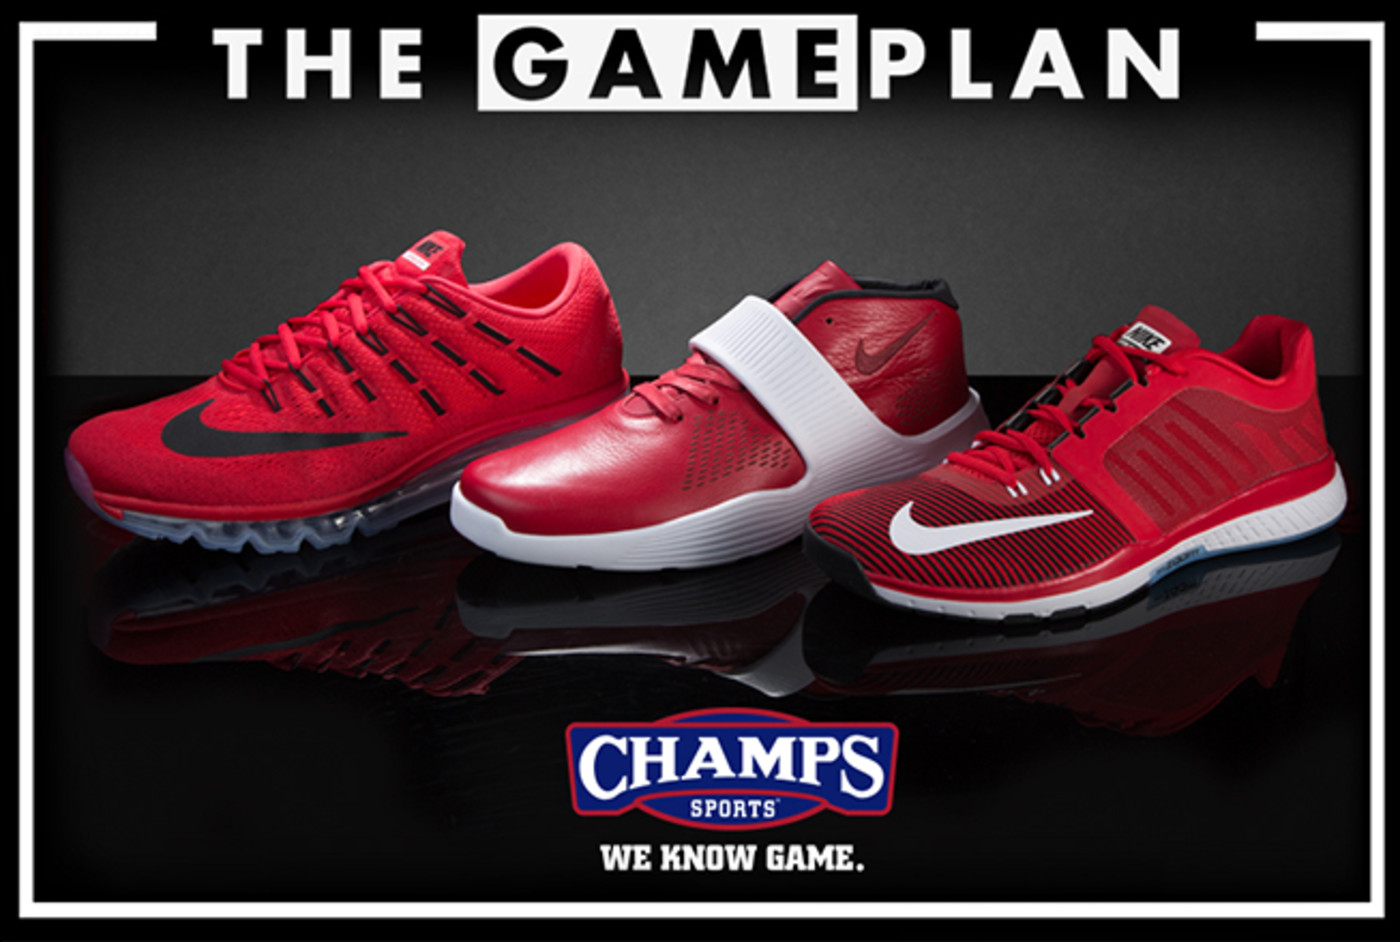 Game Plan by Champs Sports 